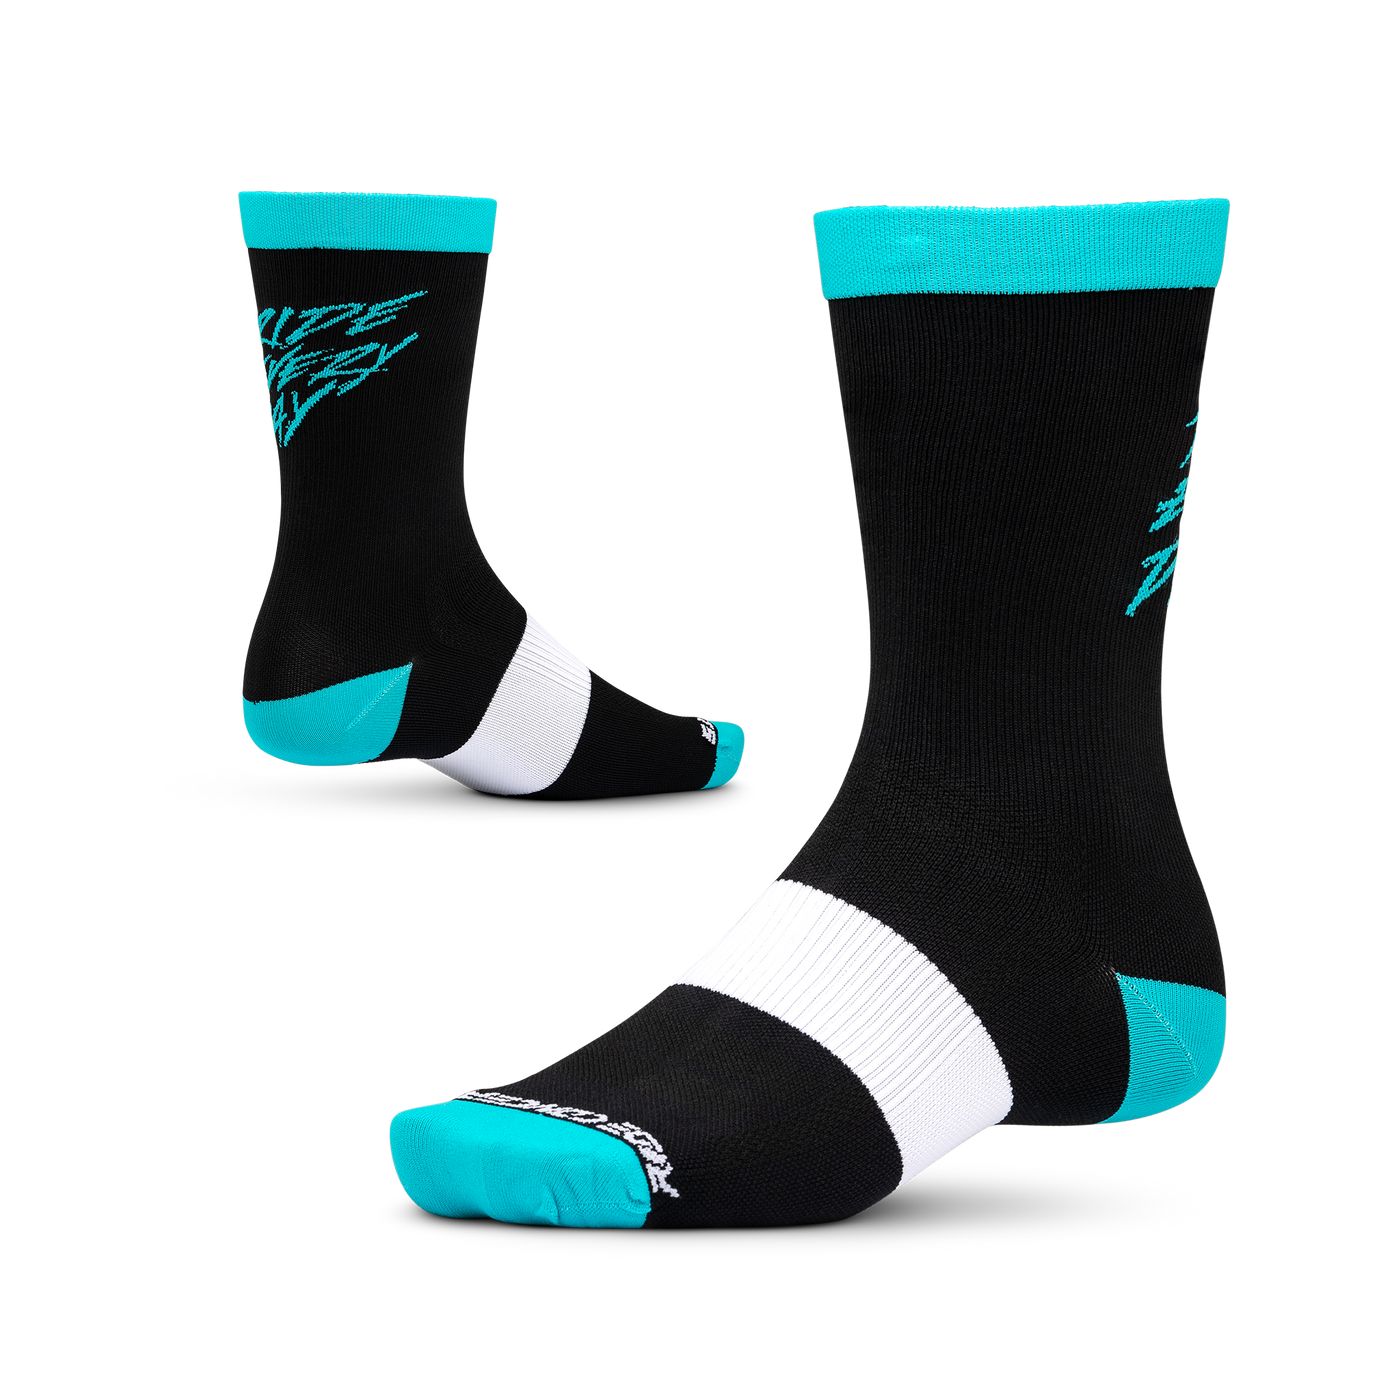 Ride Concepts Ride Every Day MTB Sock - Synthetic 8" Youth - Black and Aqua